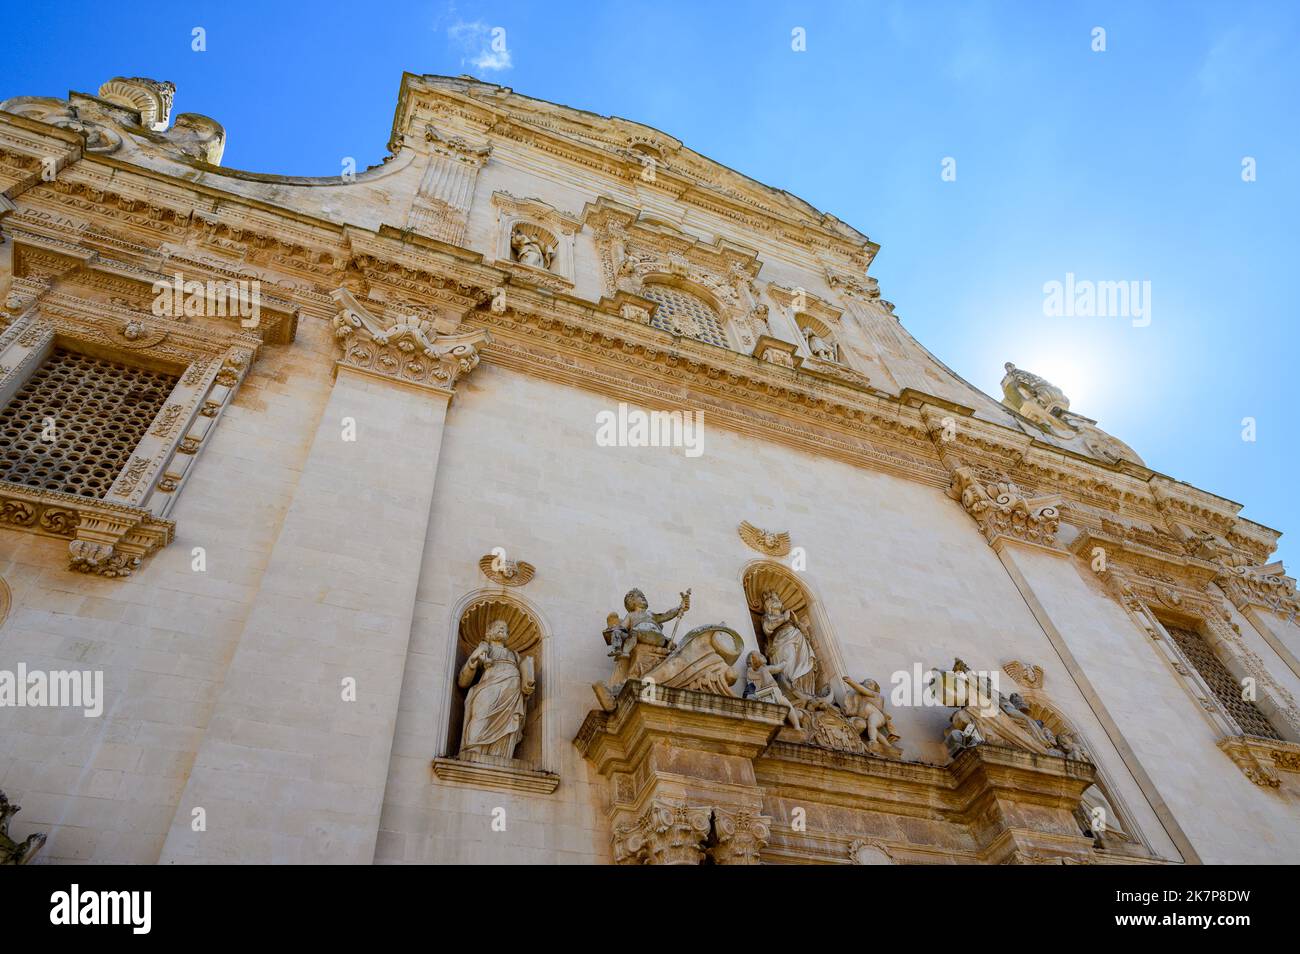 Front facade of the ornately baroque Church of Saints Peter and Paul the Apostles in Galatina, Apulia (Puglia), Italy. Stock Photo